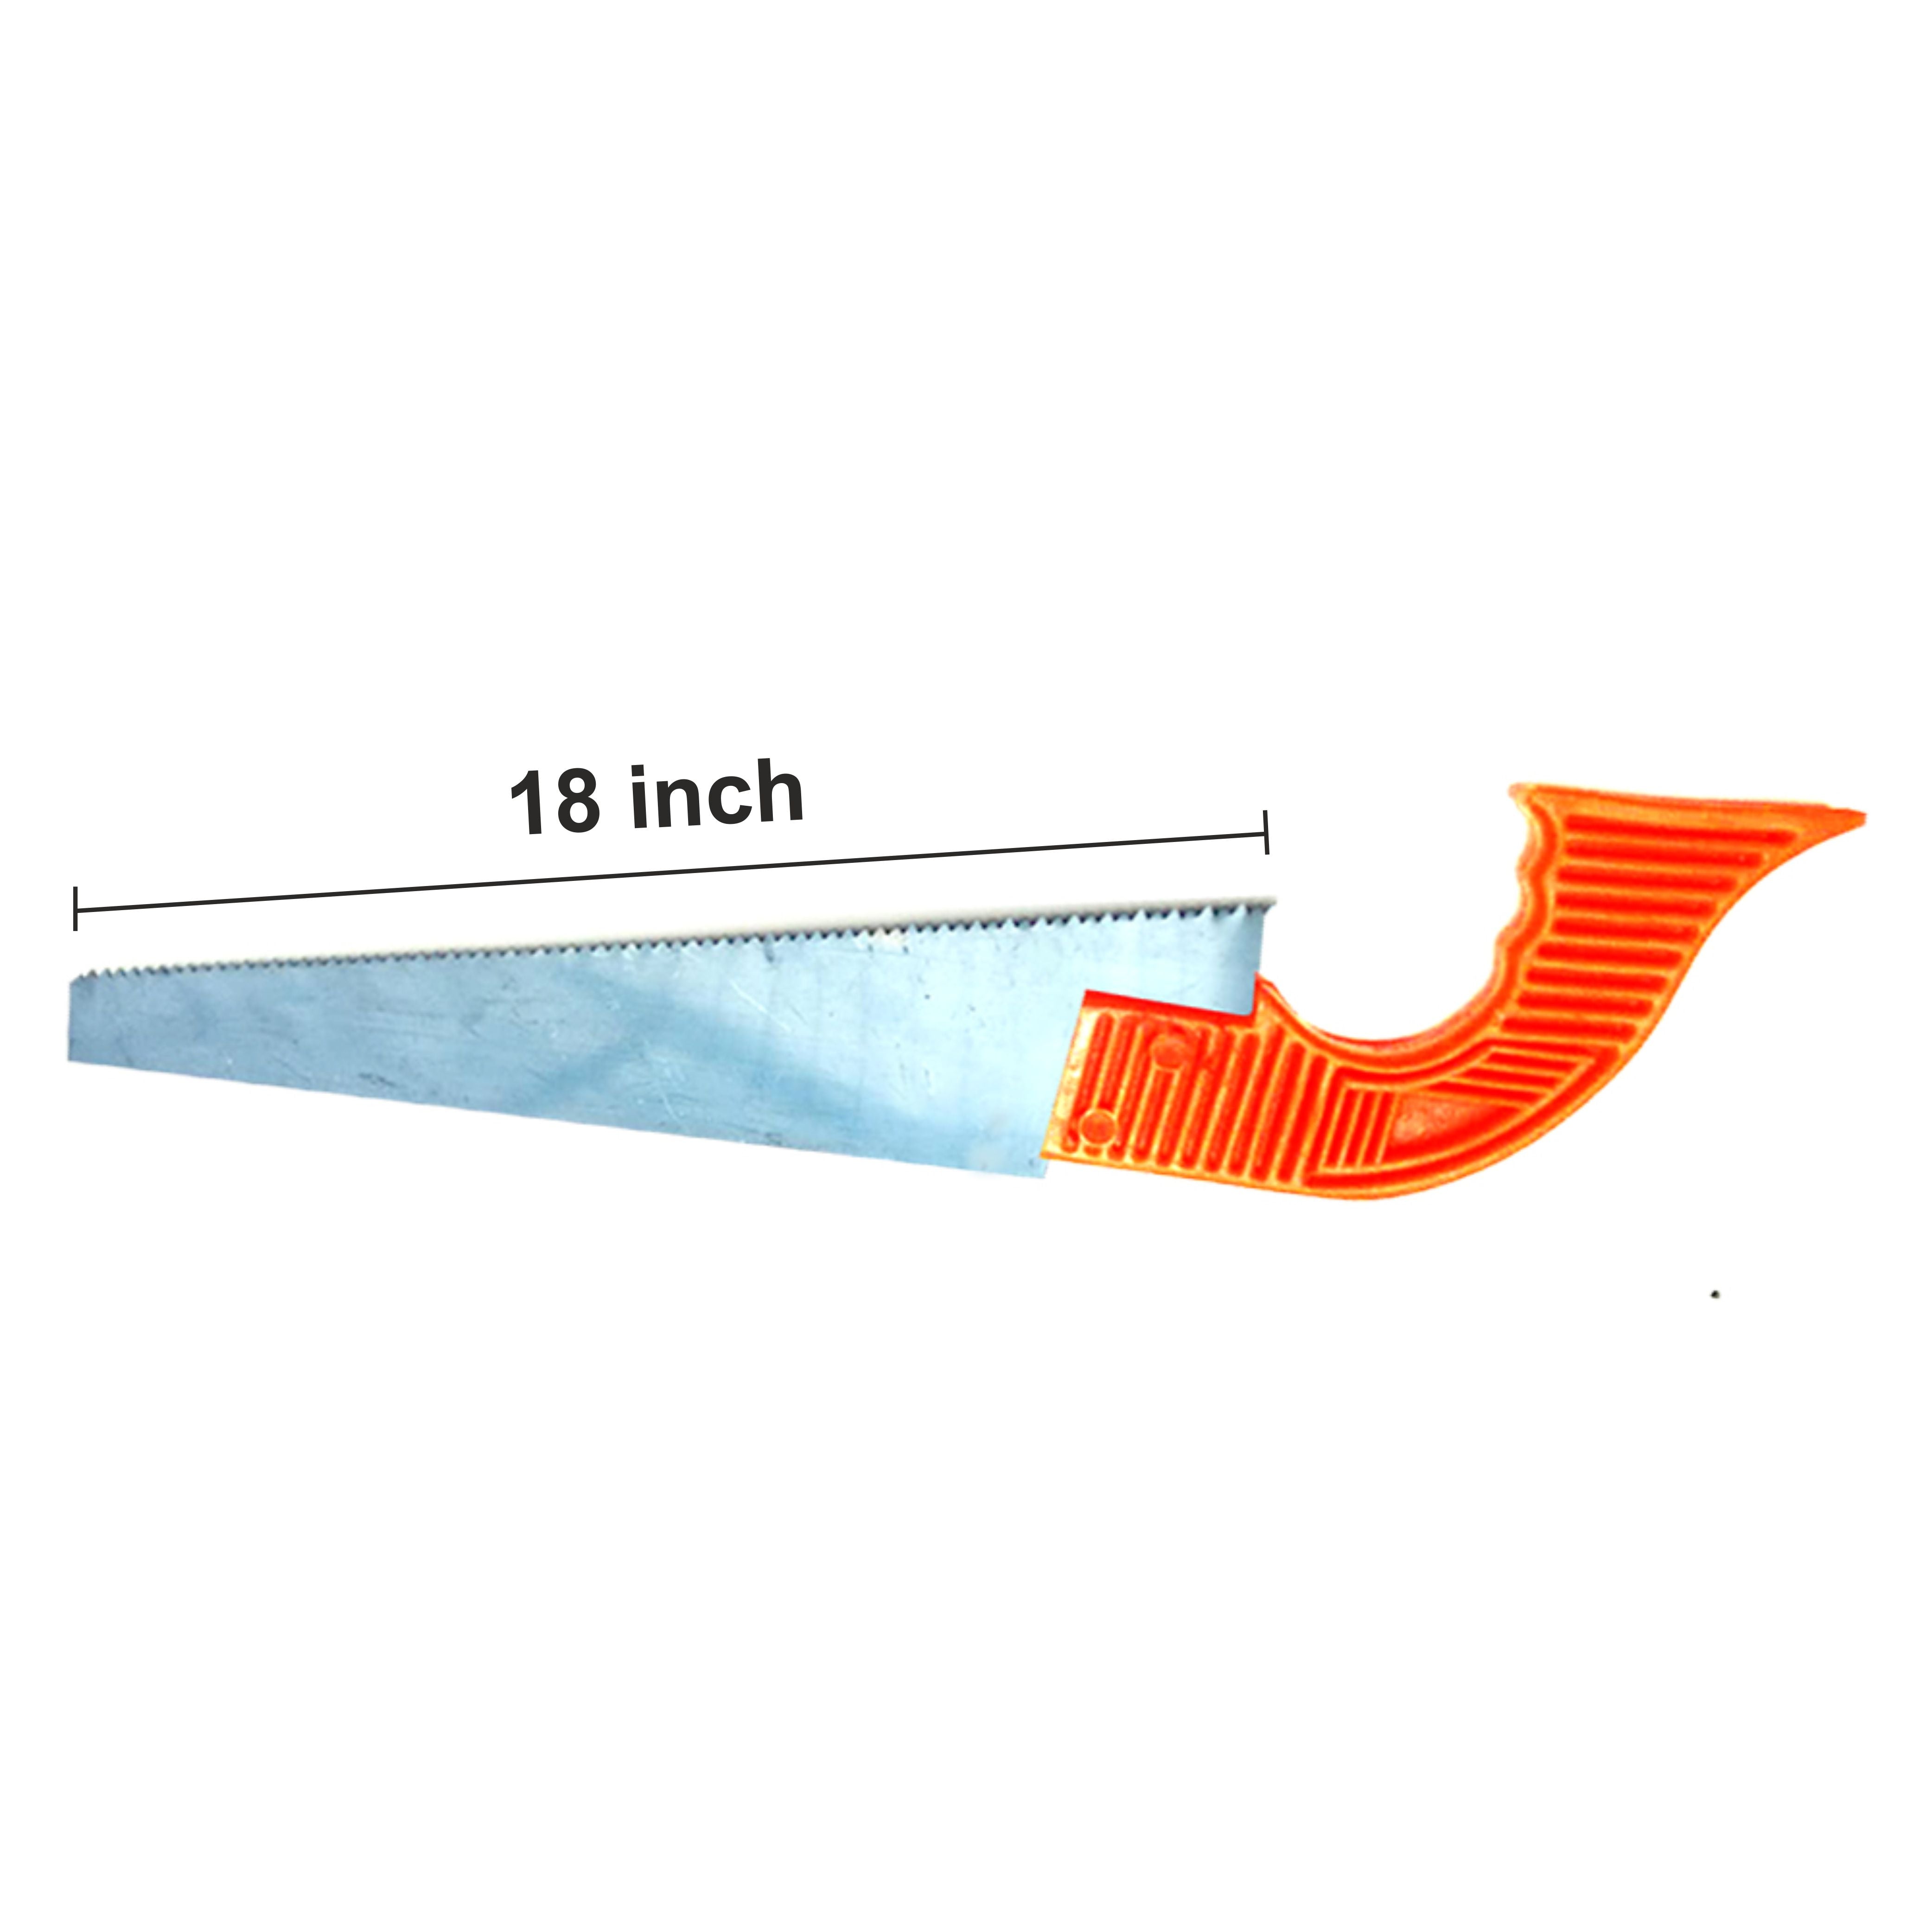 414 Hand Tools - Plastic Powerful Hand Saw 18" for Craftsmen DeoDap